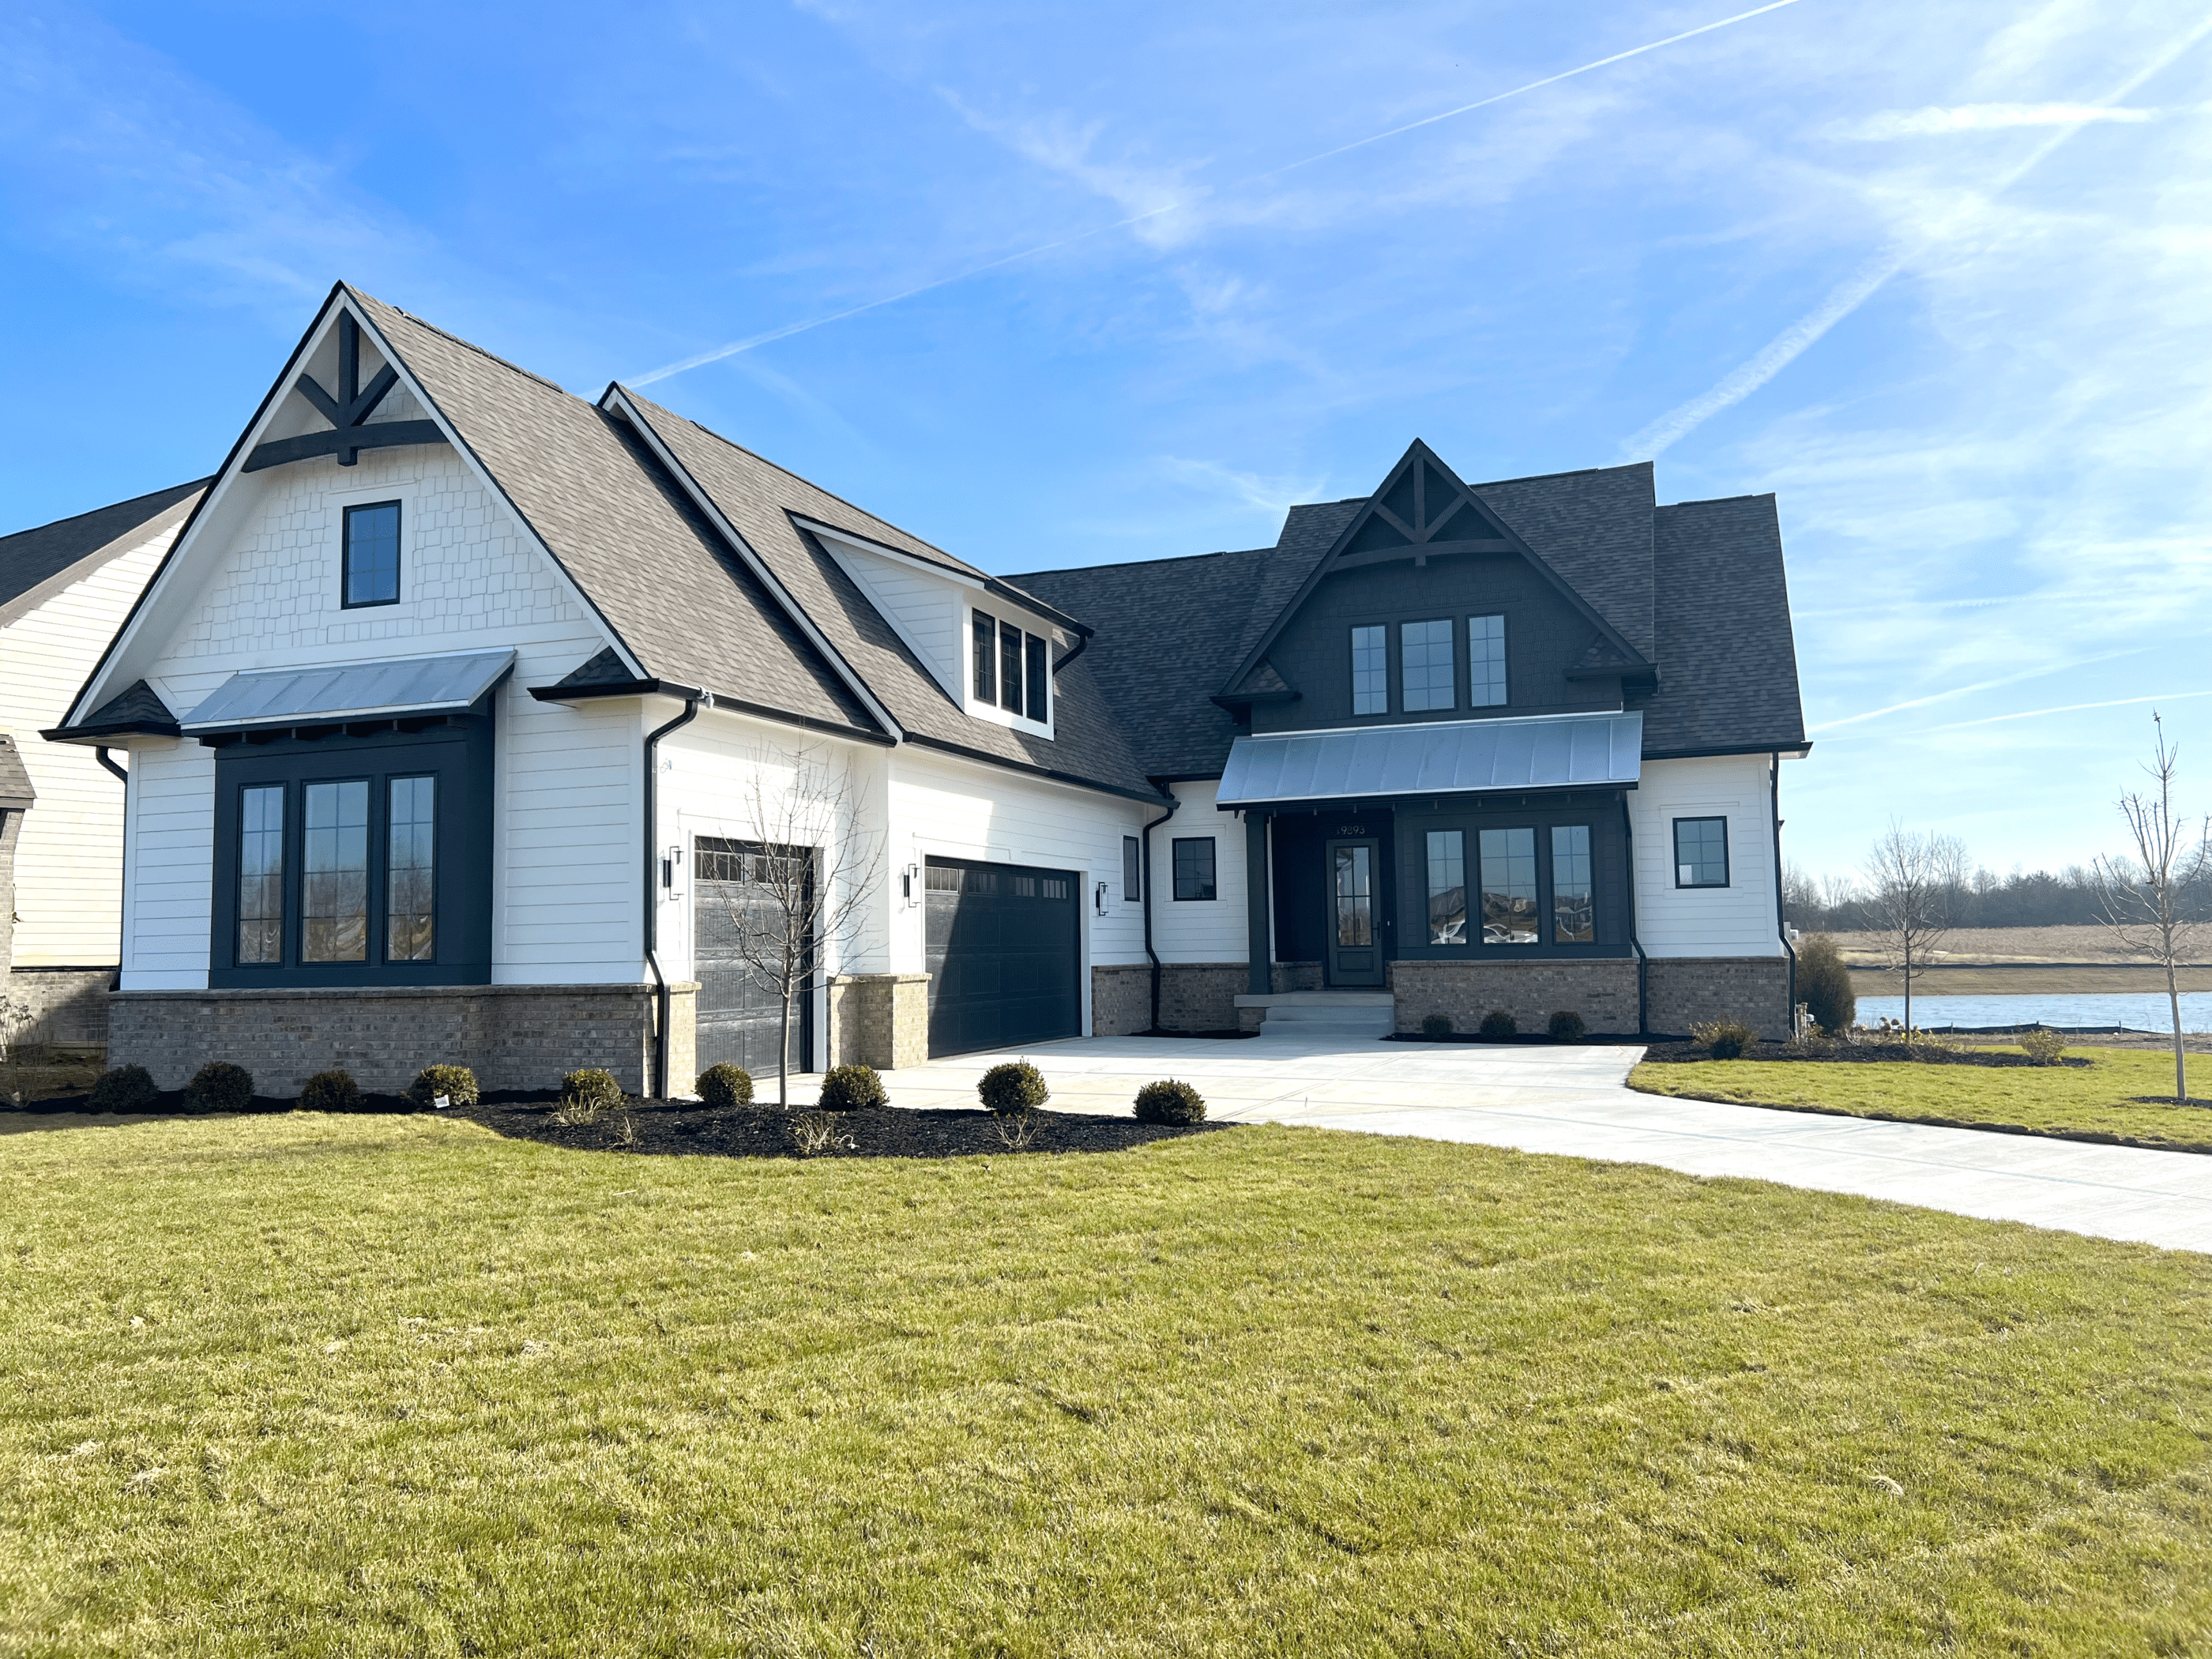 A custom home with a lake in the background, located in Westfield Indiana.